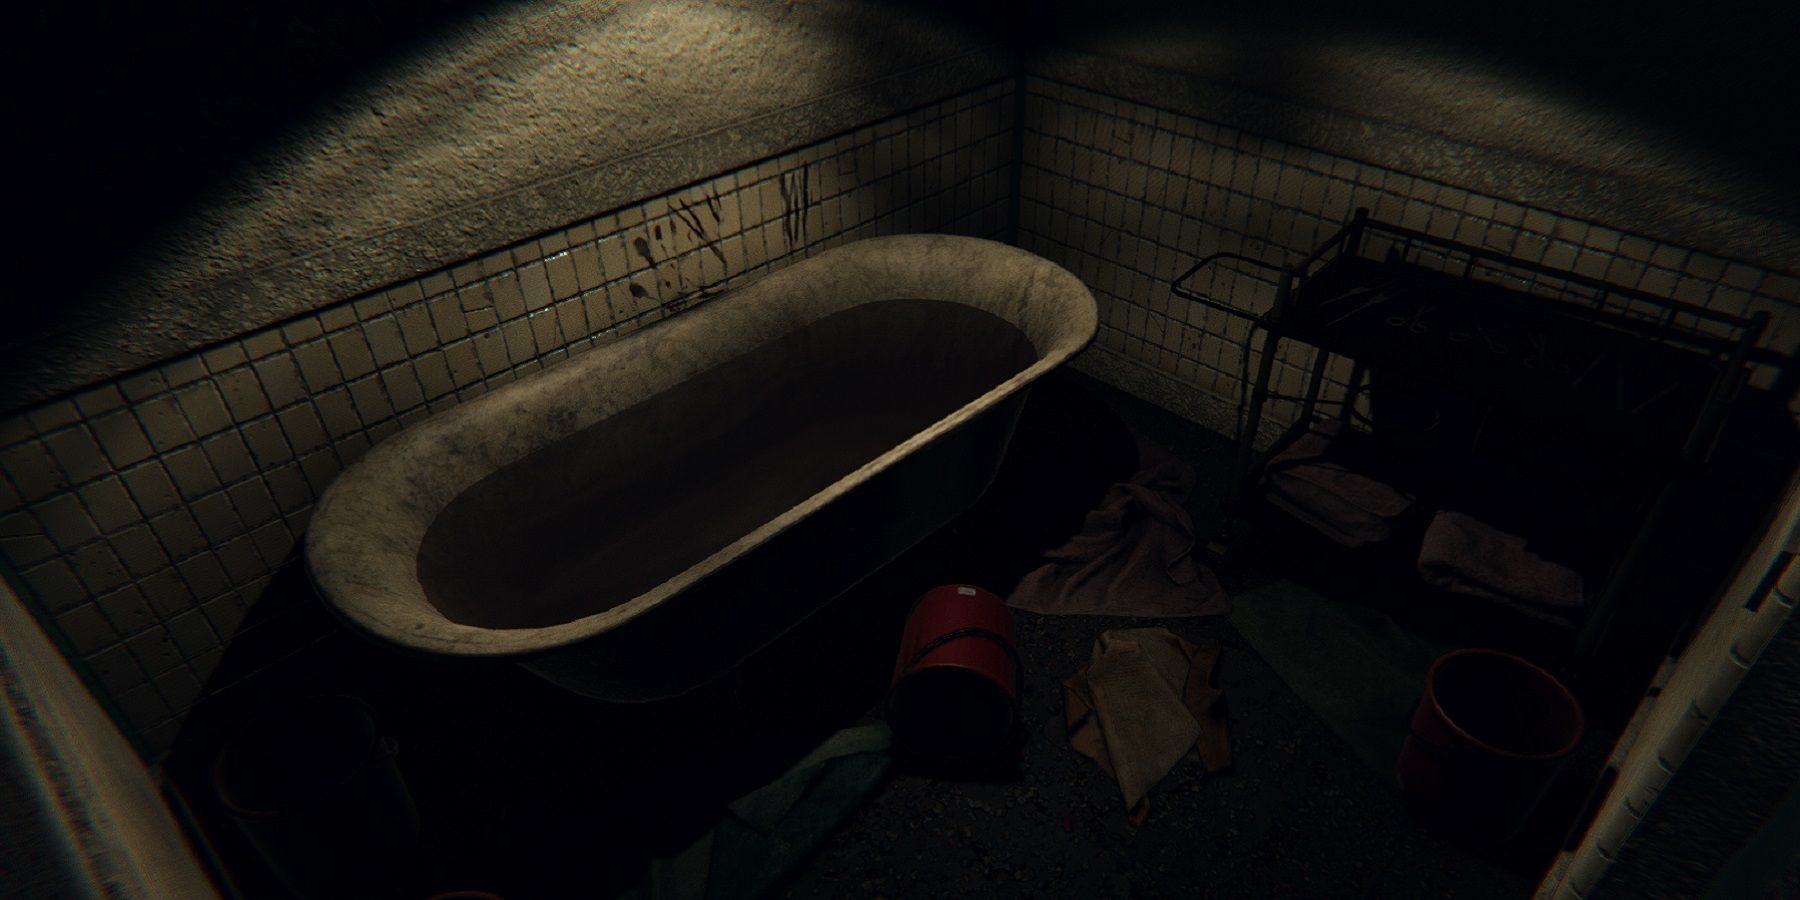 Screenshot from Phasmophobia showing a dirty bathtub in a dimly lit room.